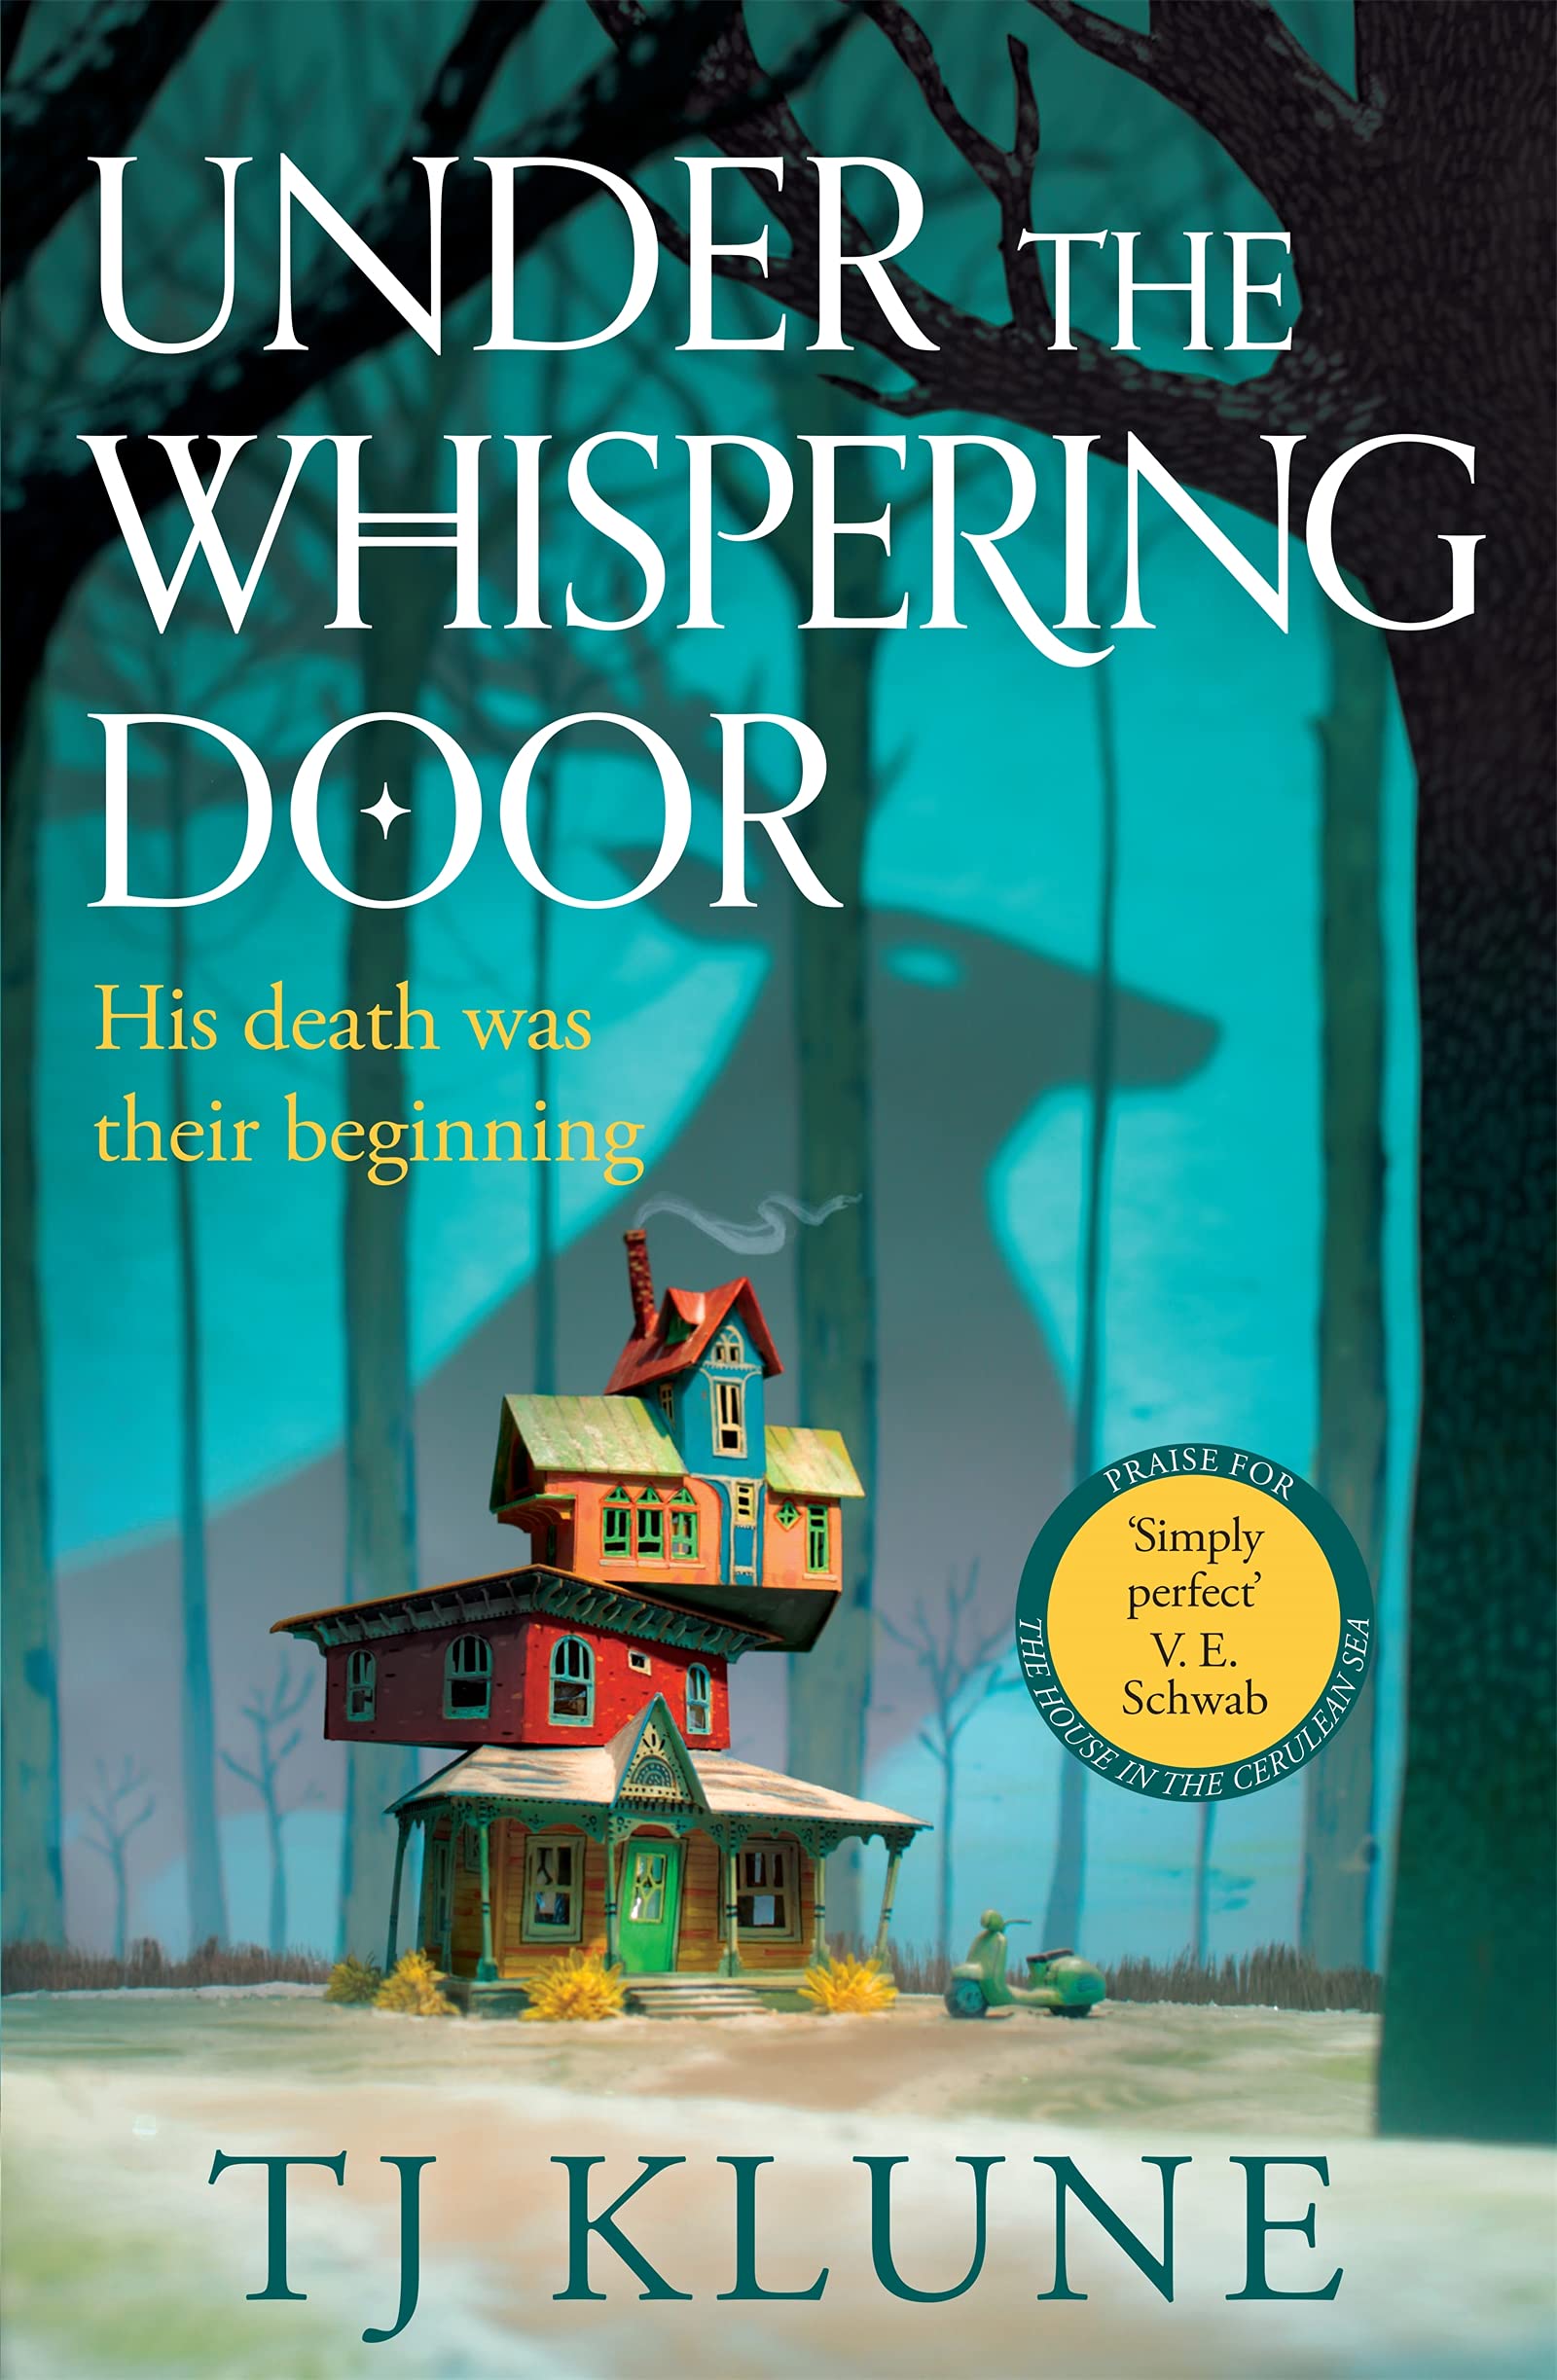 Must Read Books for Summer: Under the Whispering Door